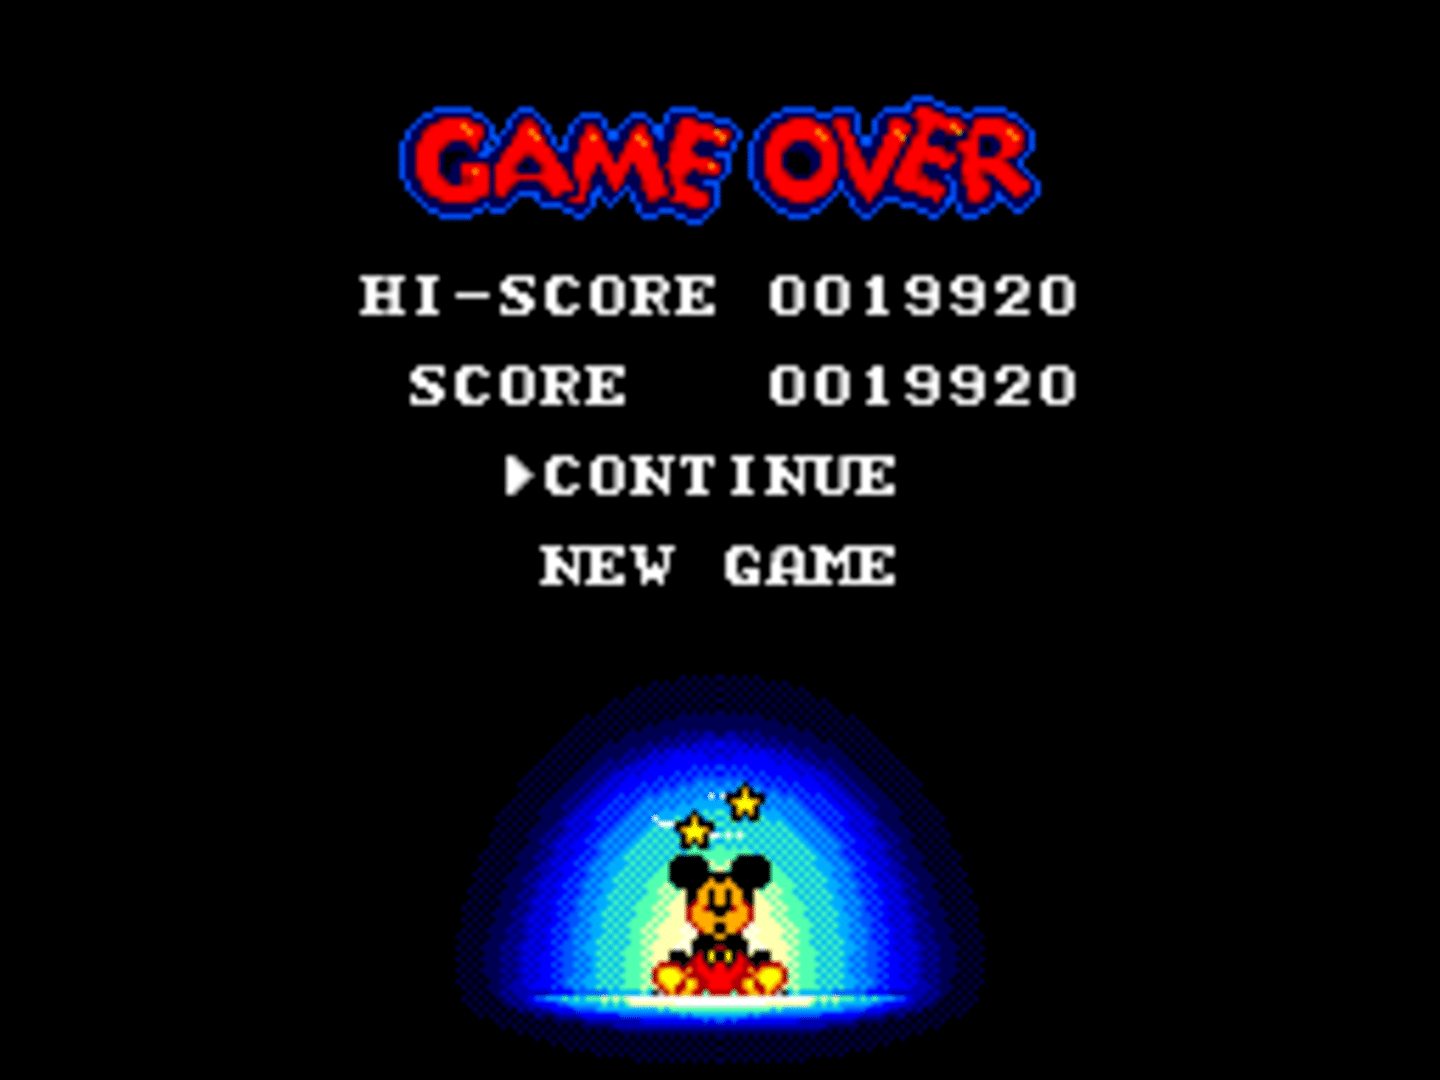 Land of Illusion Starring Mickey Mouse screenshot